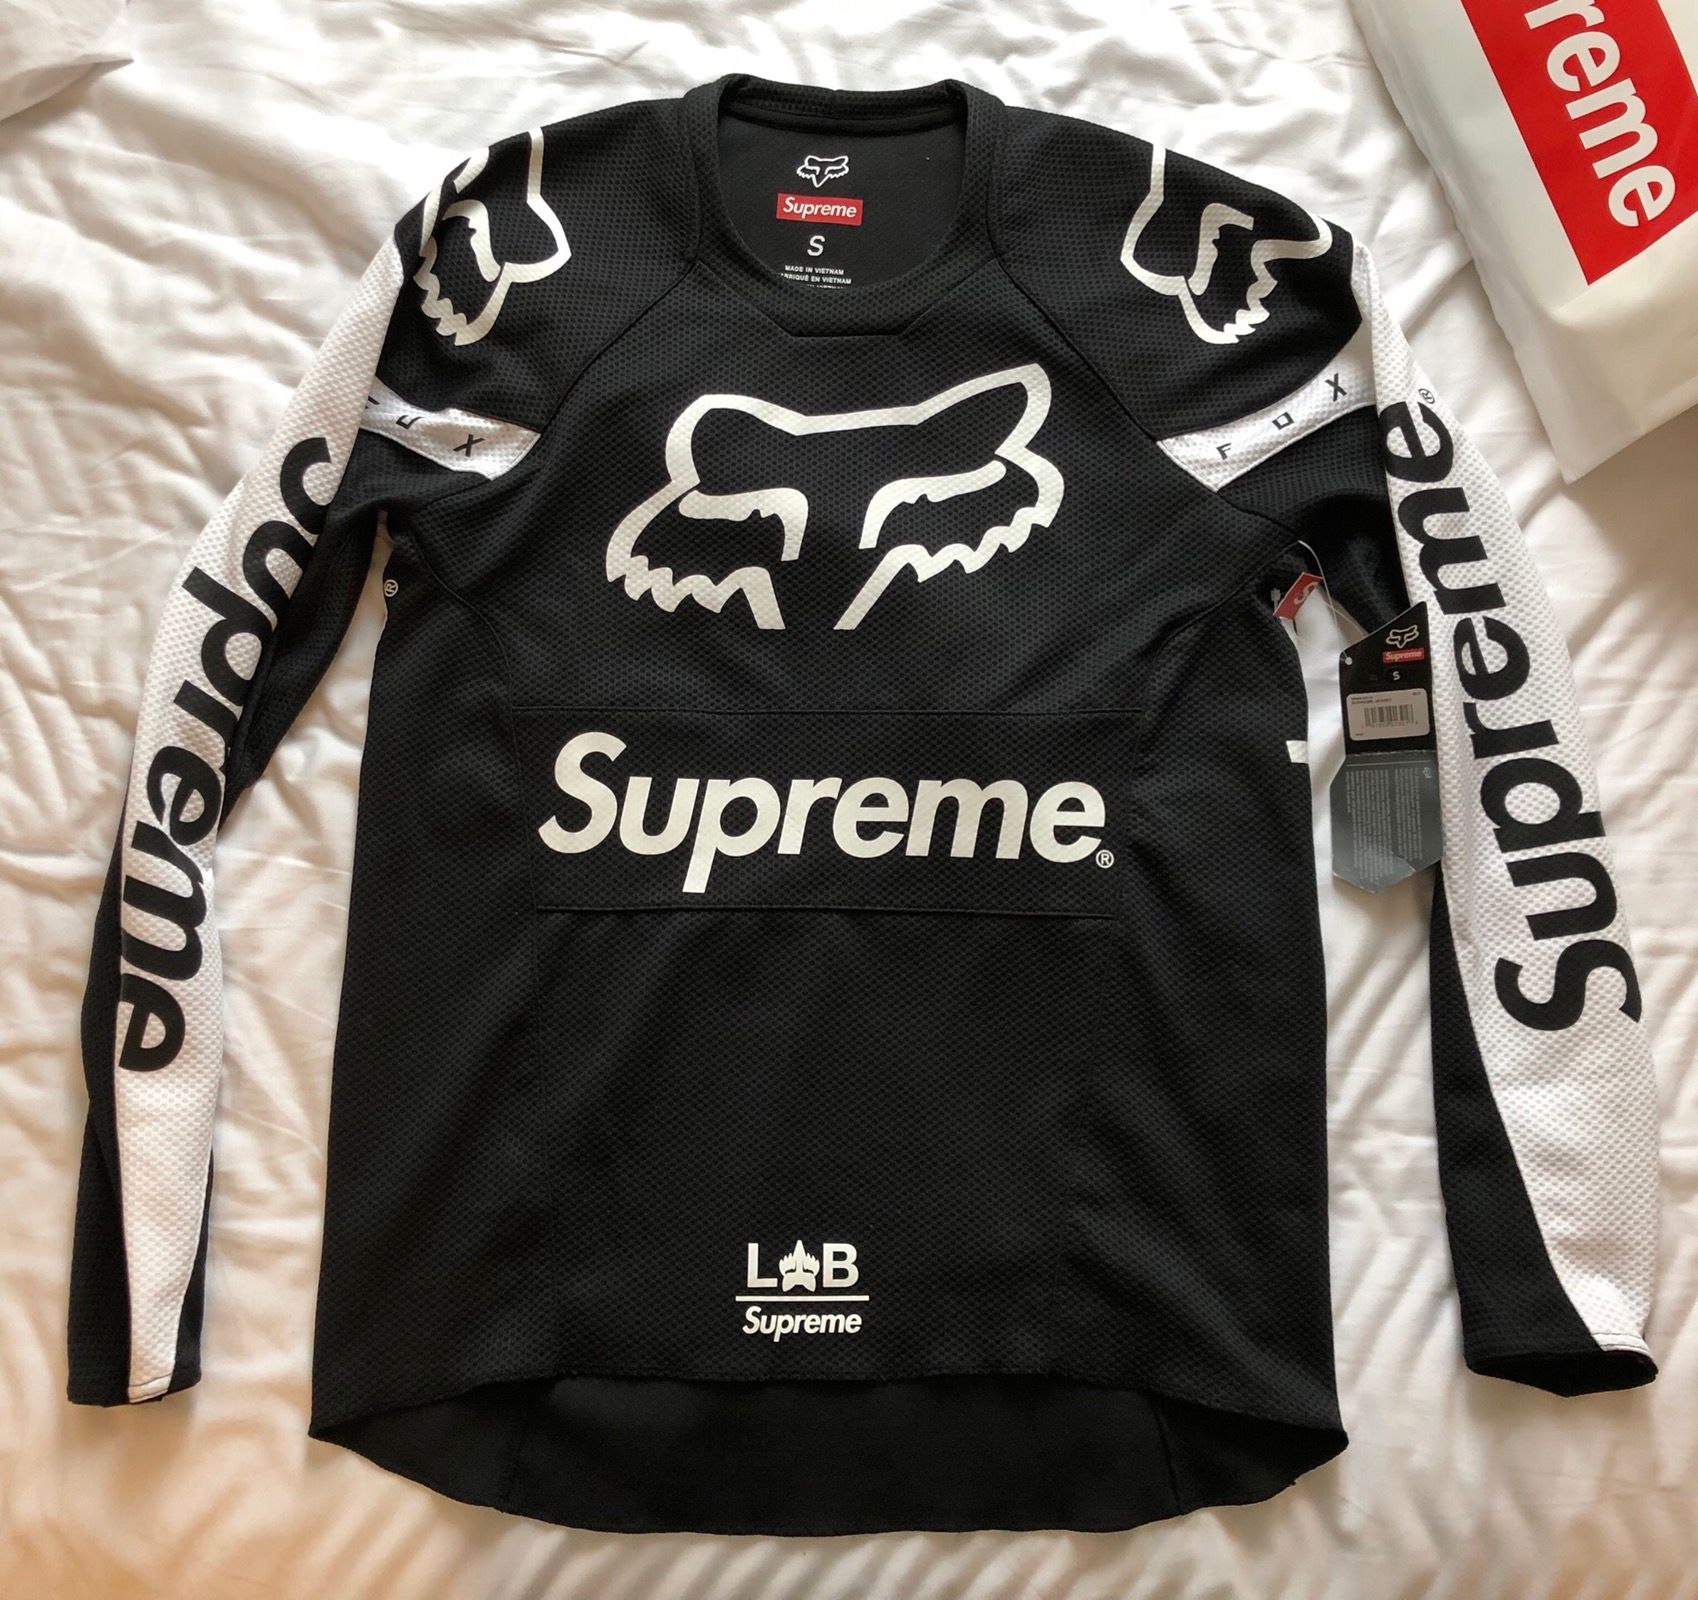 55¥] Supreme Fox Racing Jersey - found this and bought it to have